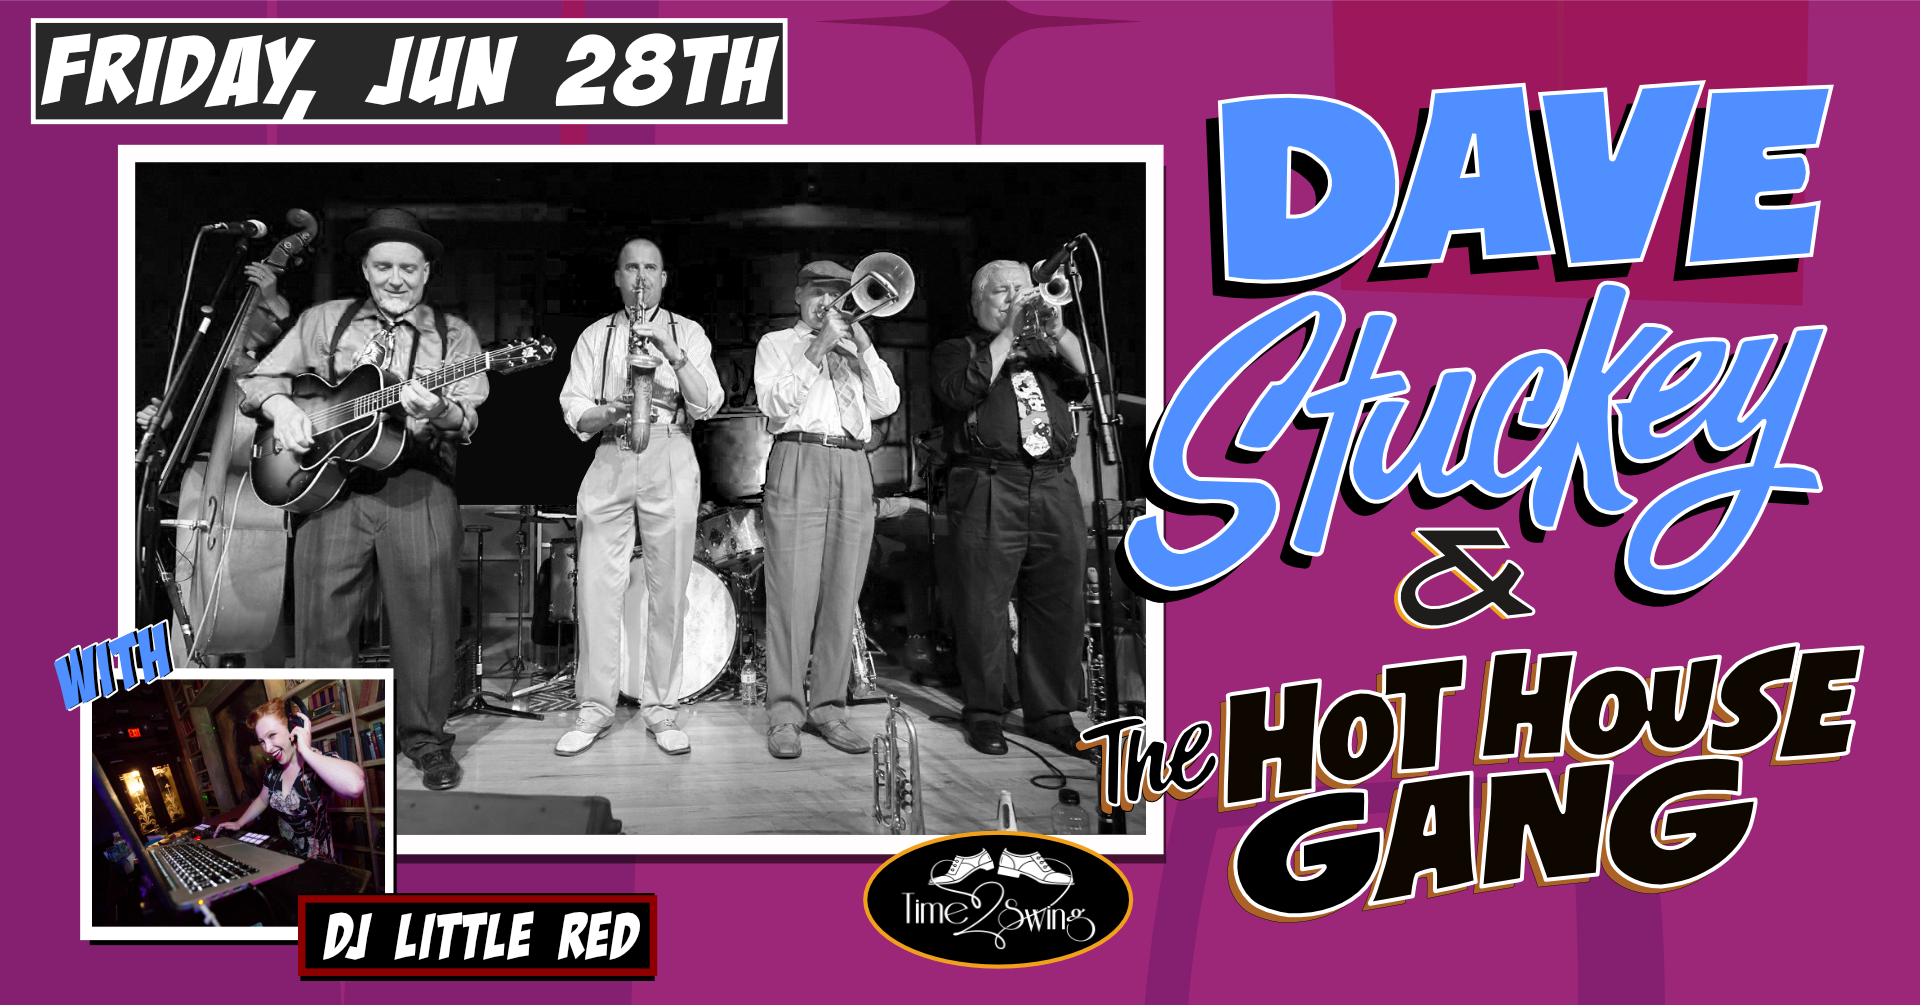 DAVE STUCKEY & THE HOT HOUSE GANG with DJ LITTLE RED